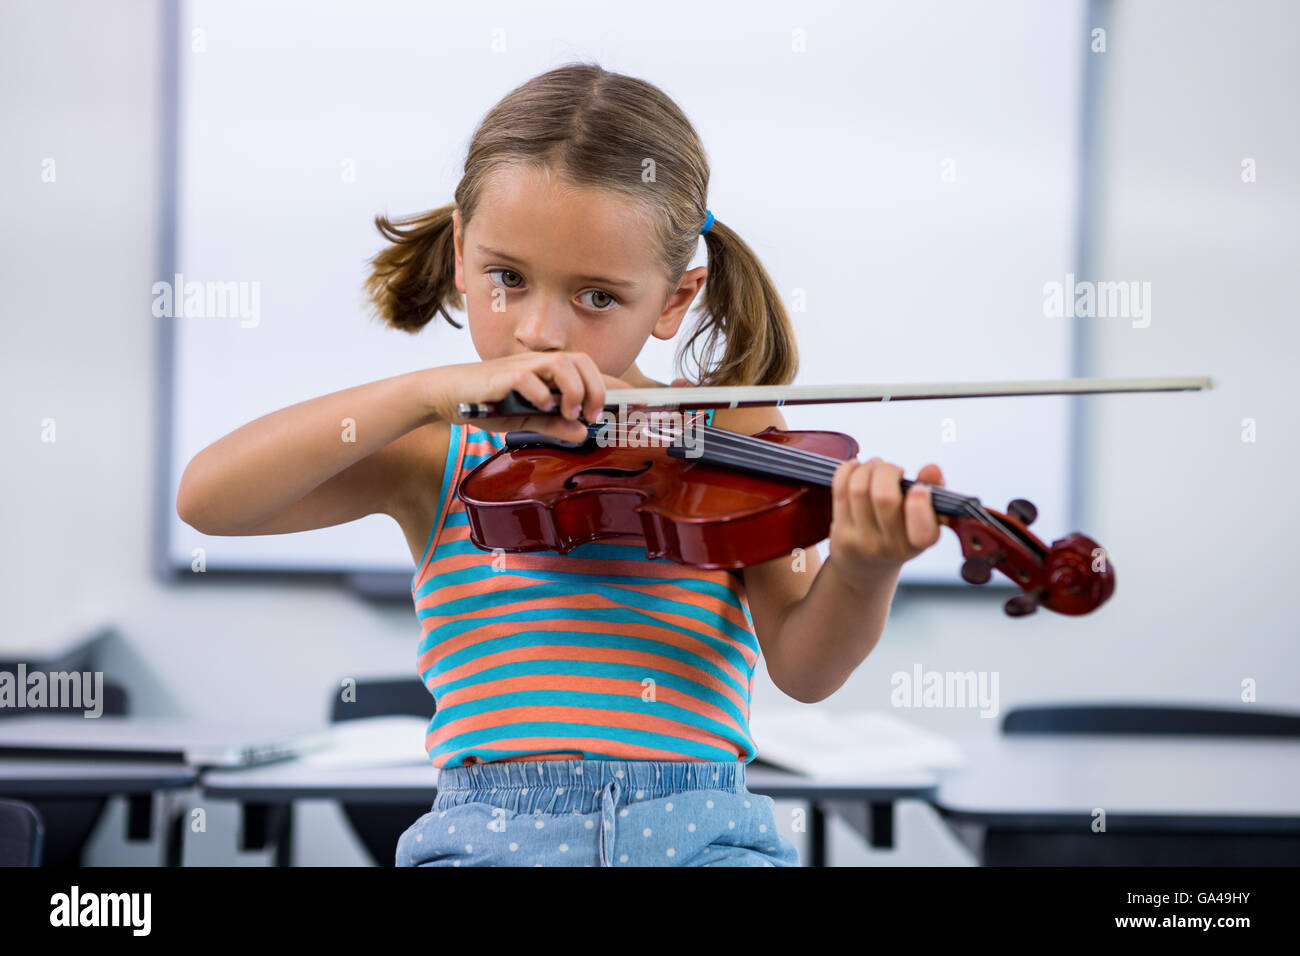 Girl playing violin in classroom Stock Photo